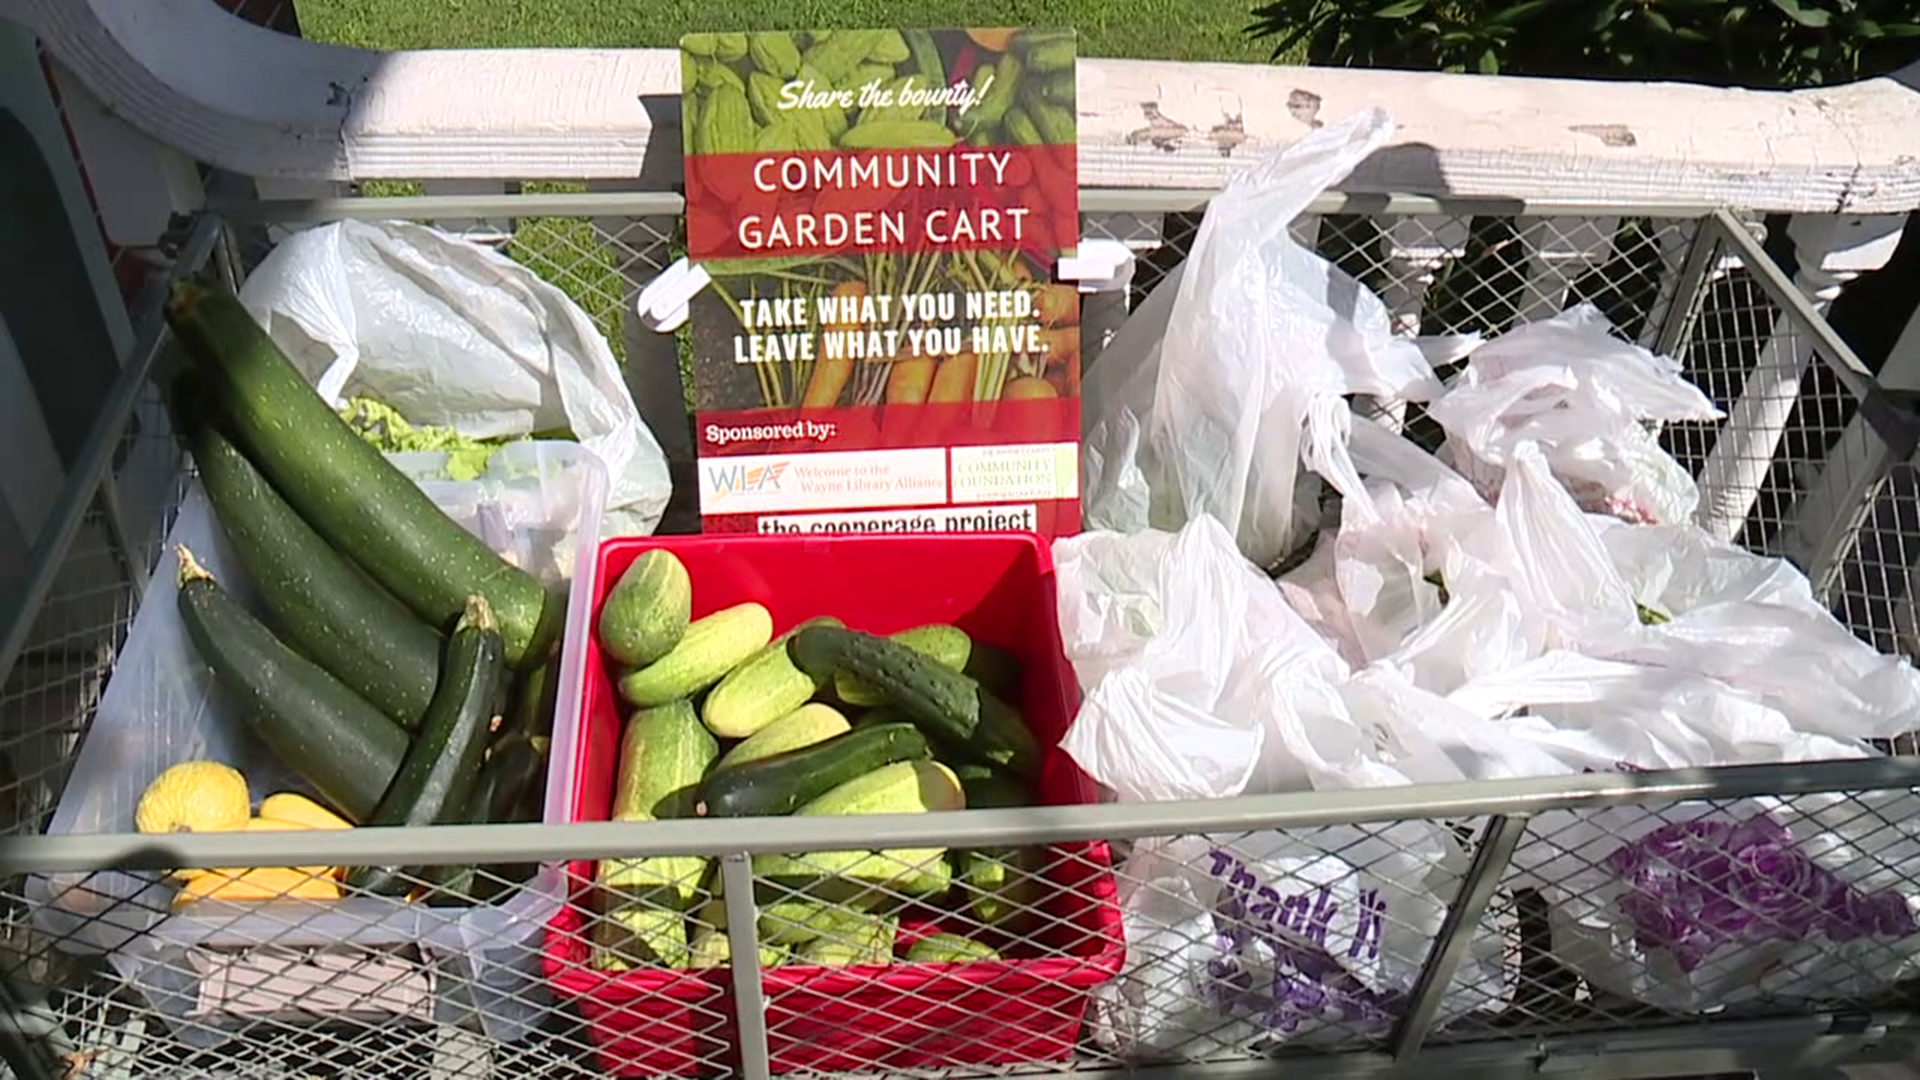 Outside of all Wayne County libraries carts are placed for surplus fruits and vegetables donated from gardens or farms